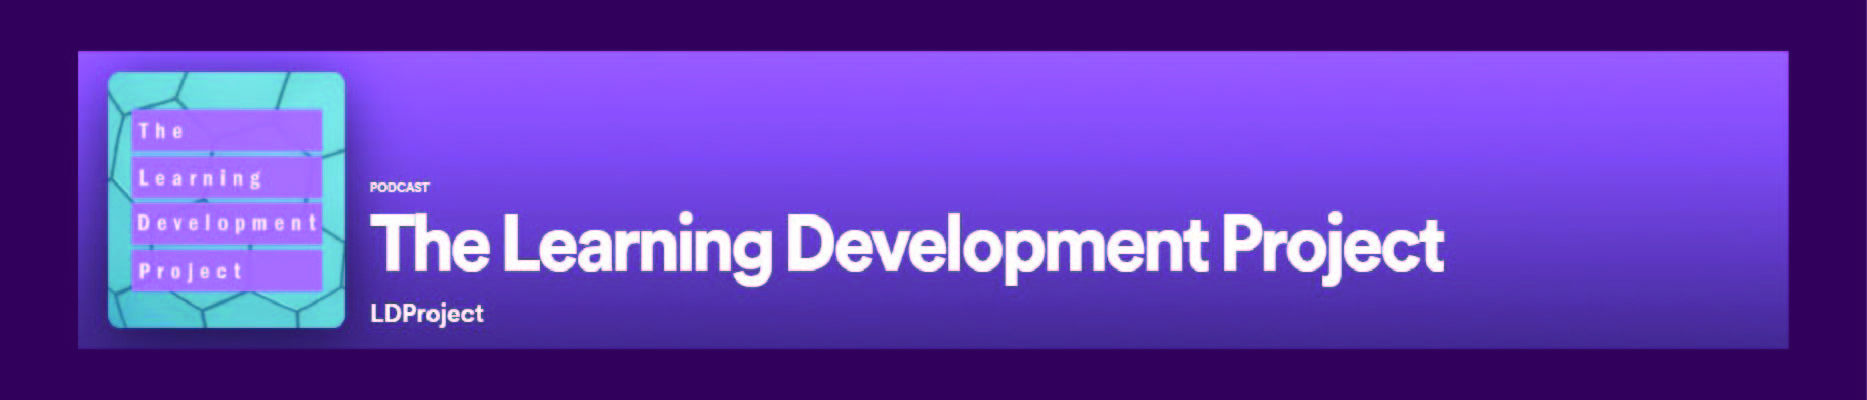 The Learning Development Project Podcast